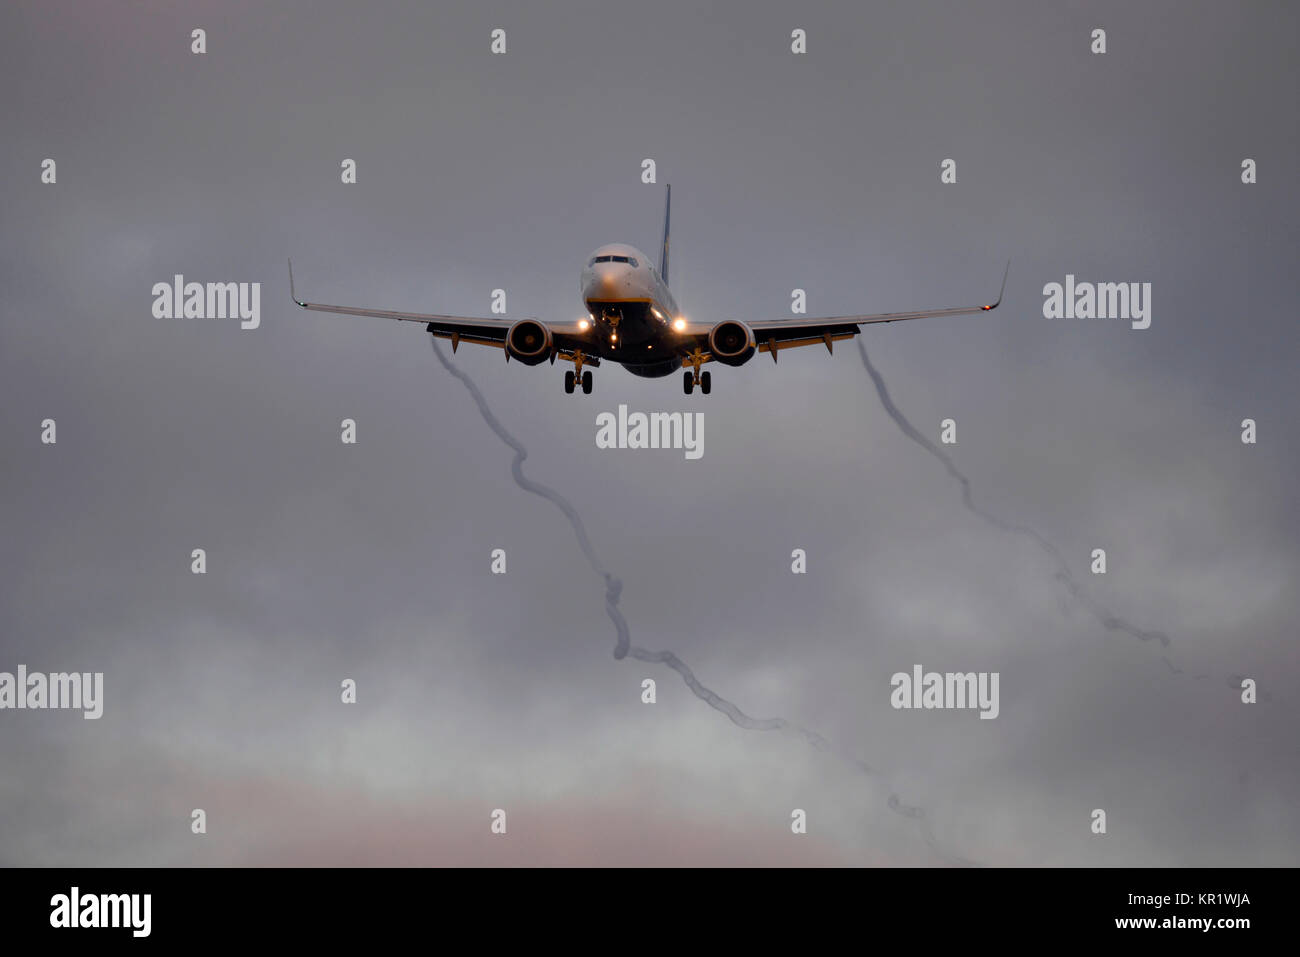 Ryanair Boeing 737 airliner jet plane landing at London Stansted Airport at dusk. Vortices condensation streaming from the wing flaps Stock Photo